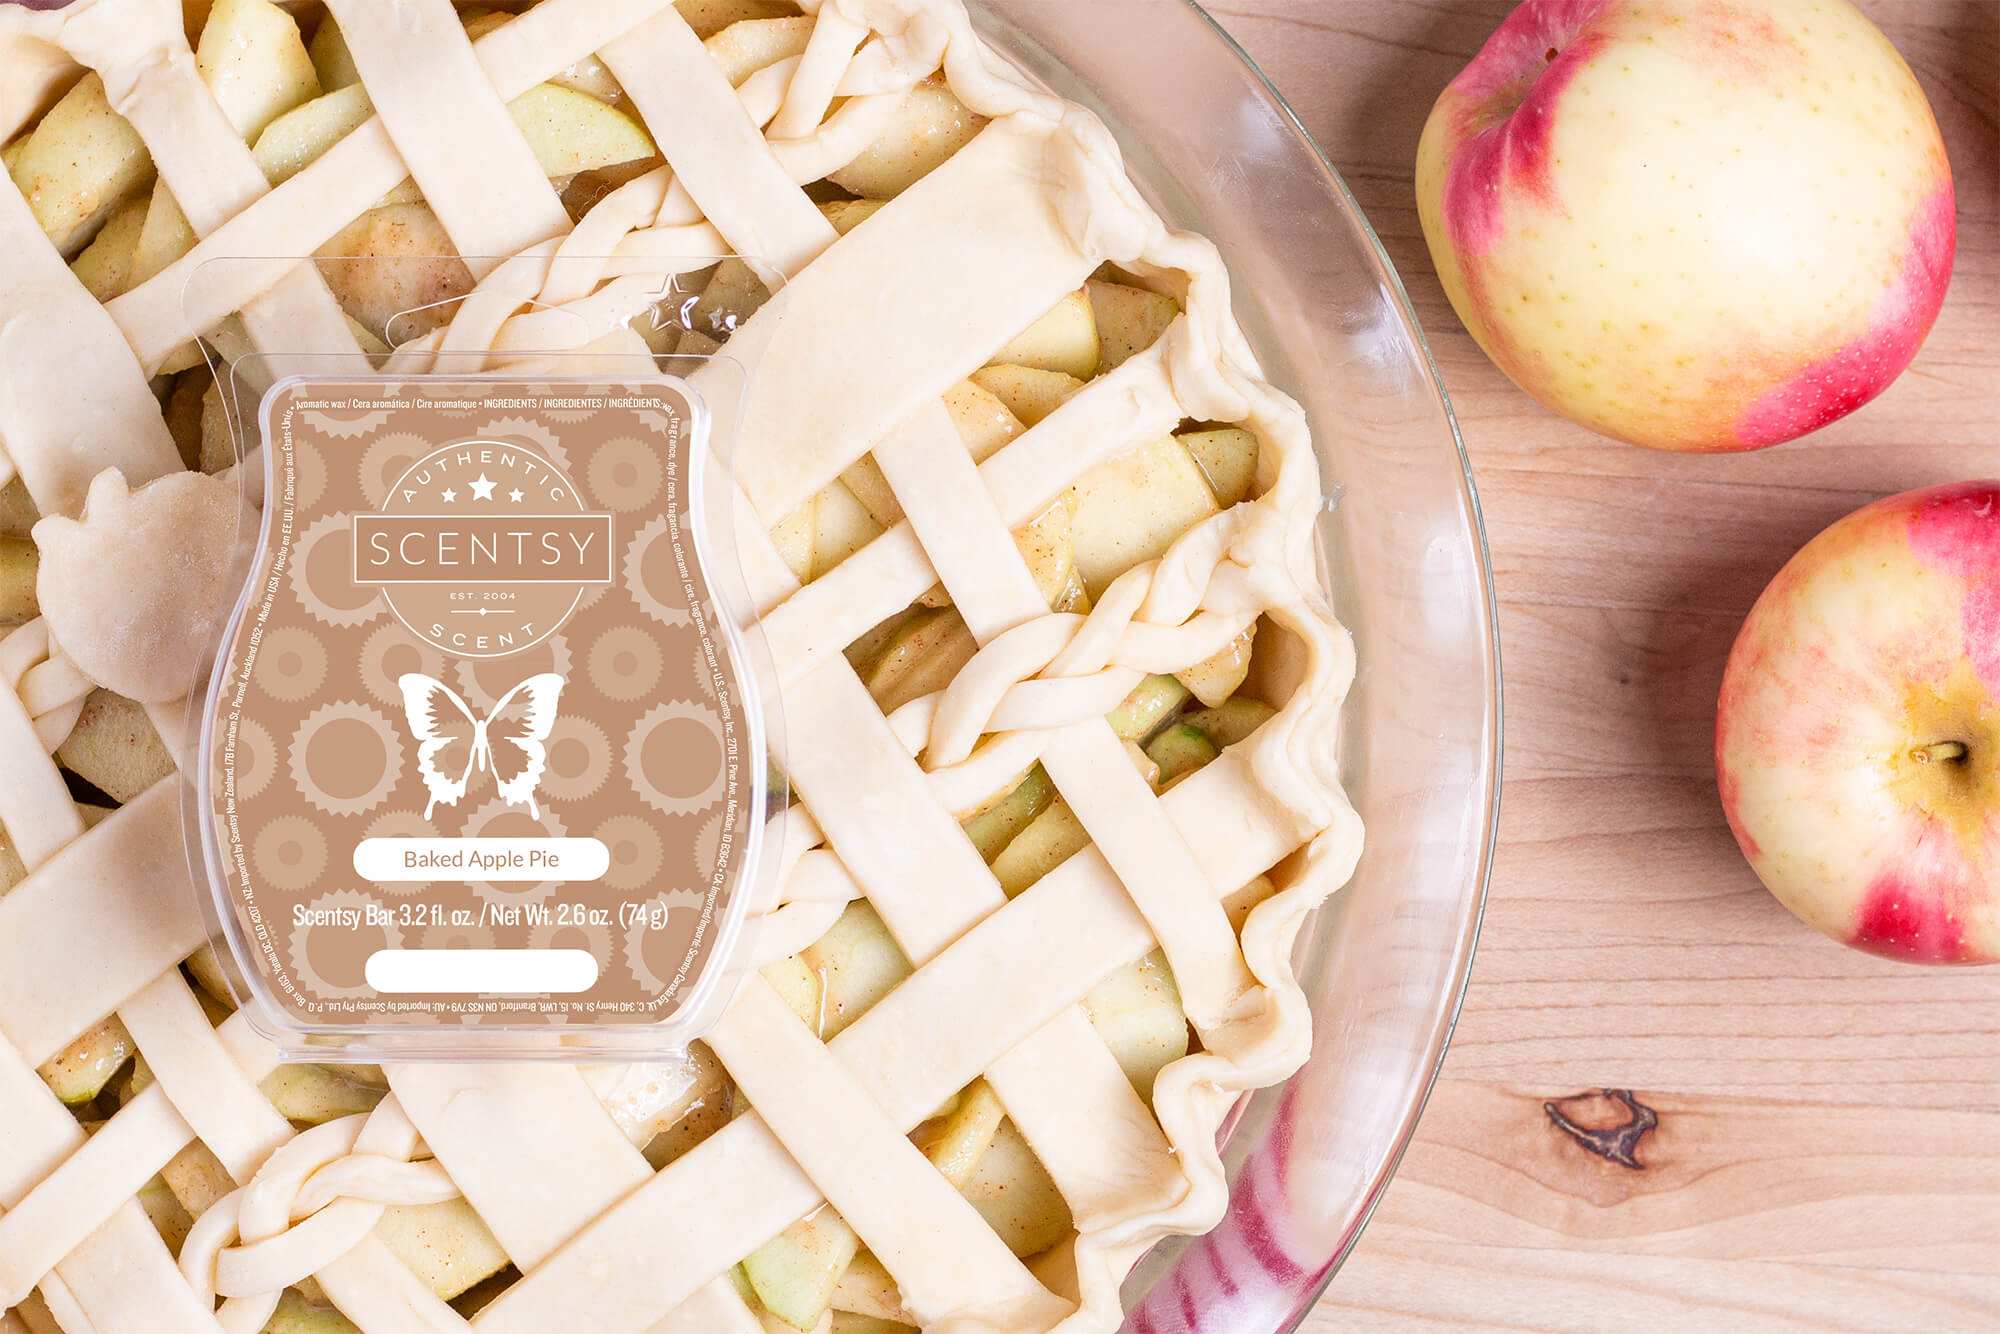 Scentsy's Baked Apple Pie wax bar on top of an apple pie